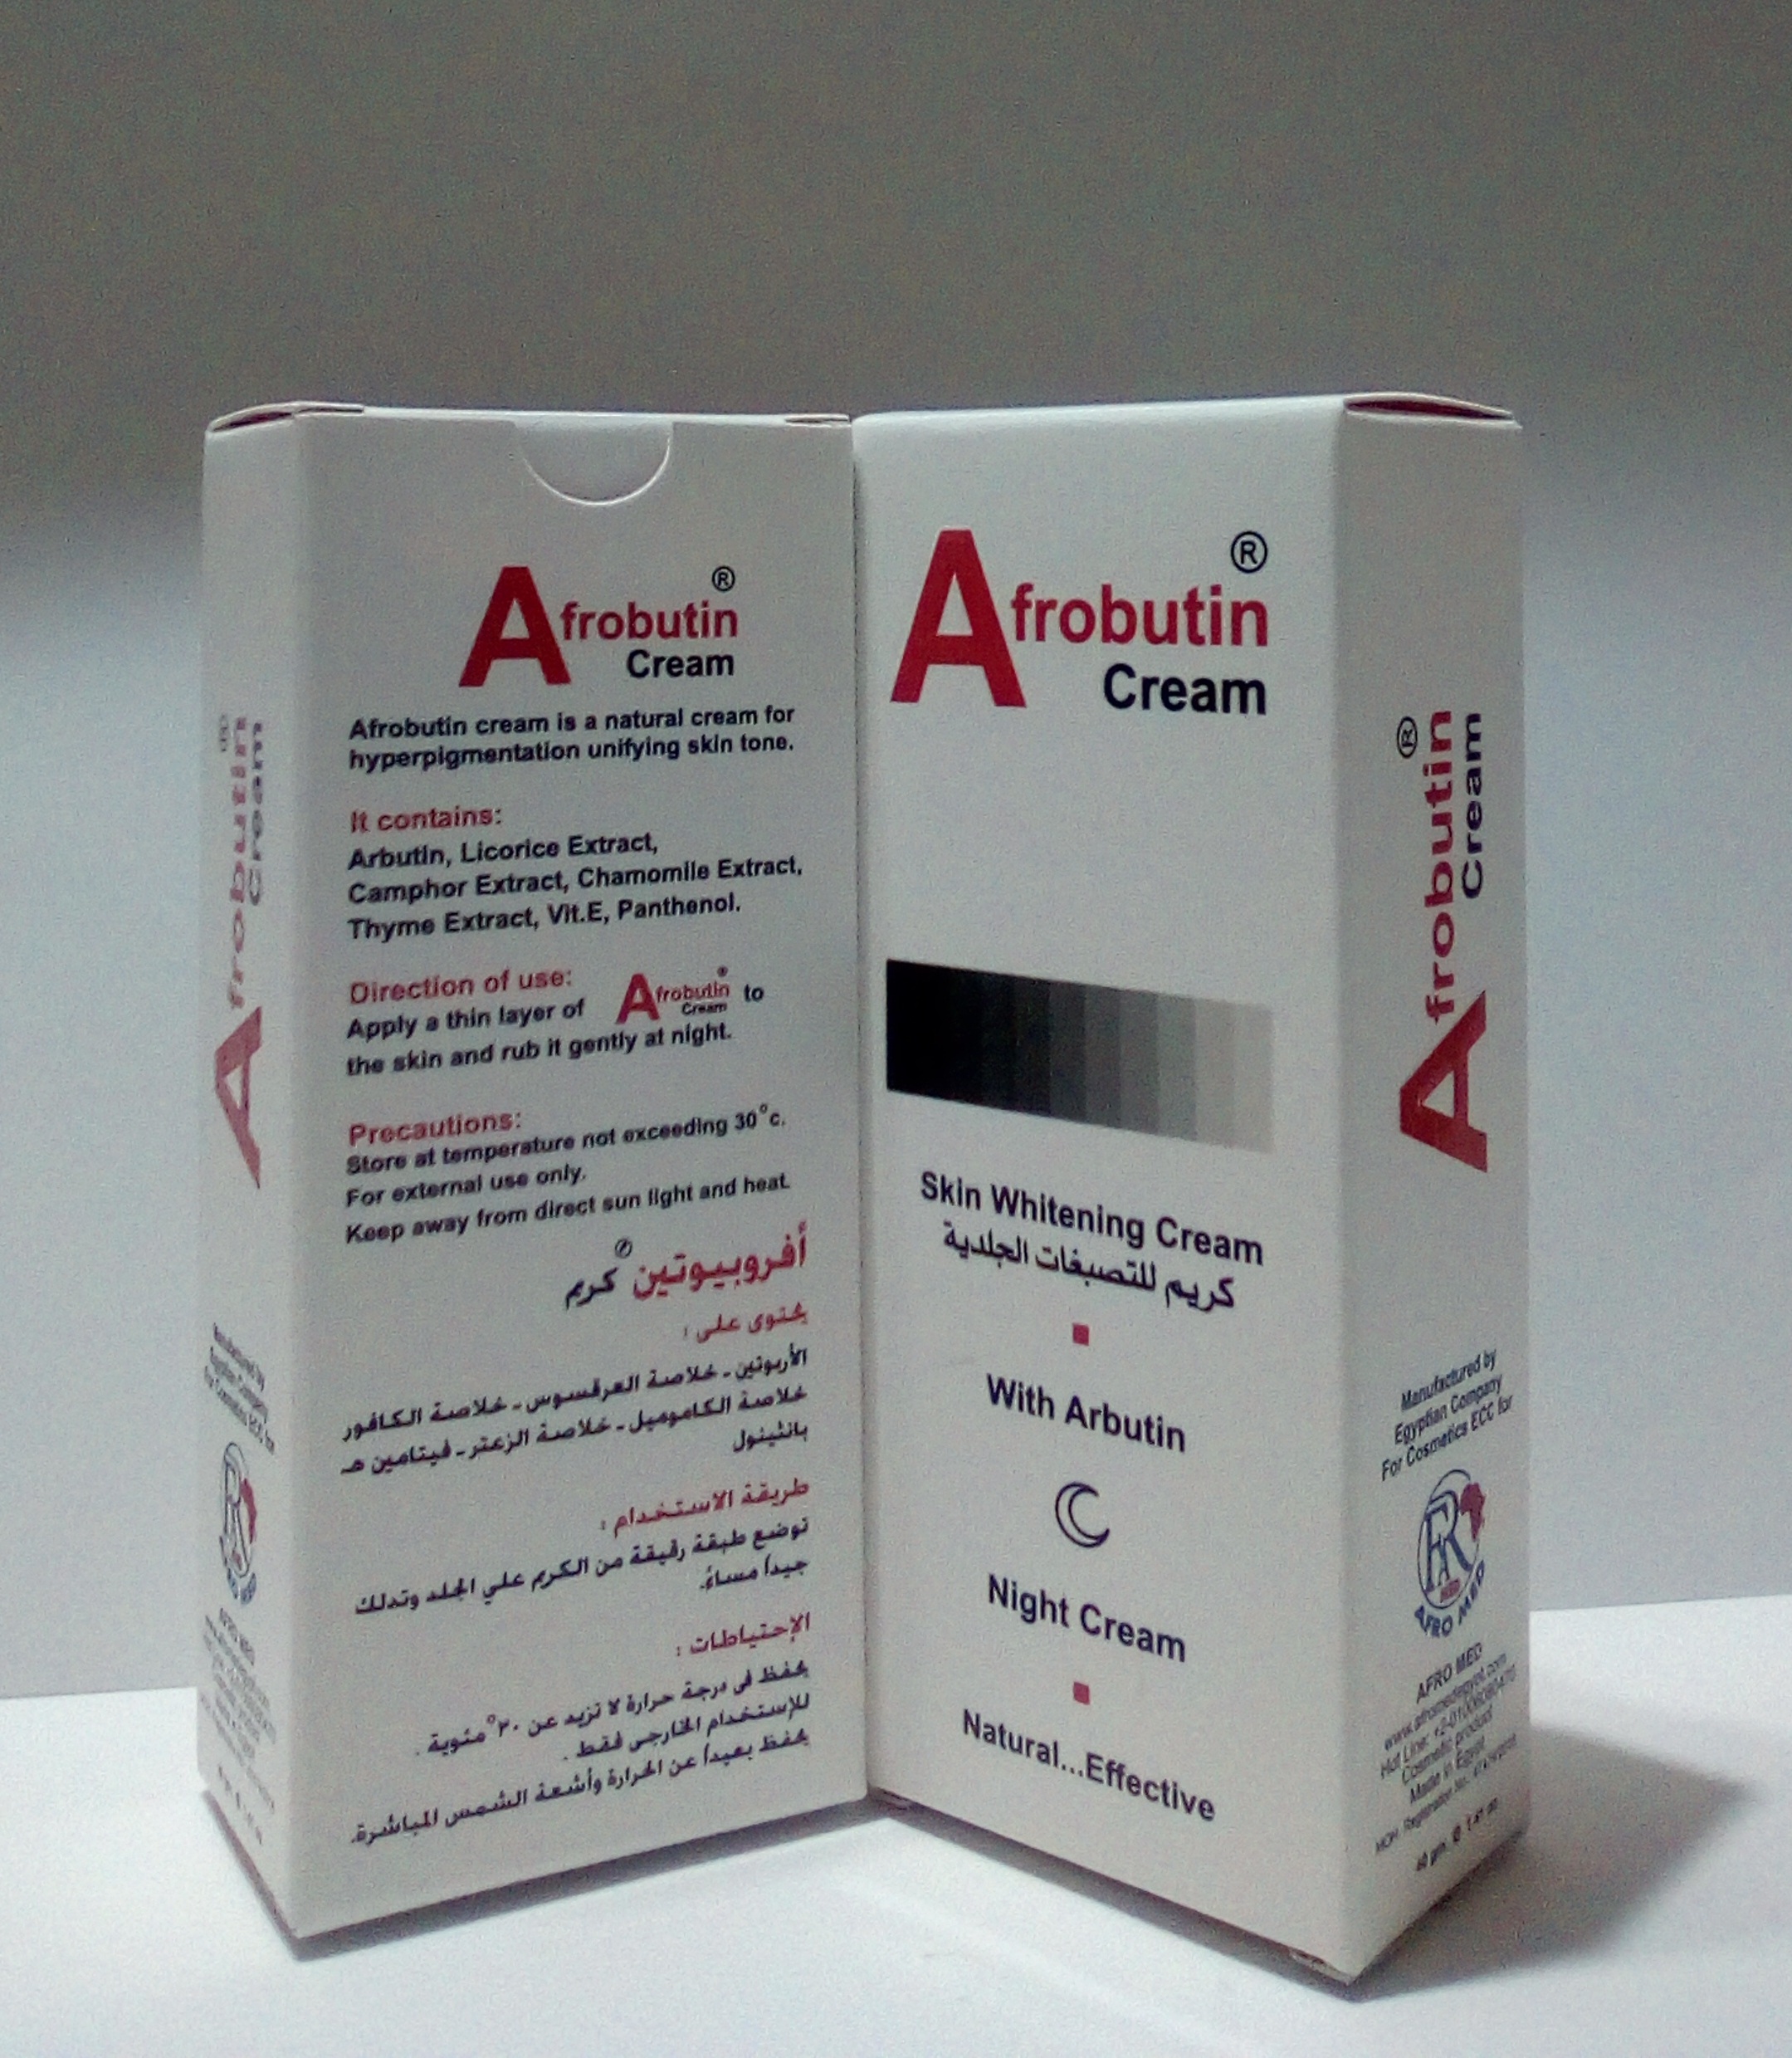 Product image - Skin whitening cream . A natural medication for hyperpigmentation.
Unify skin tone.                                                                                                                                                                                                                                                                                                                  